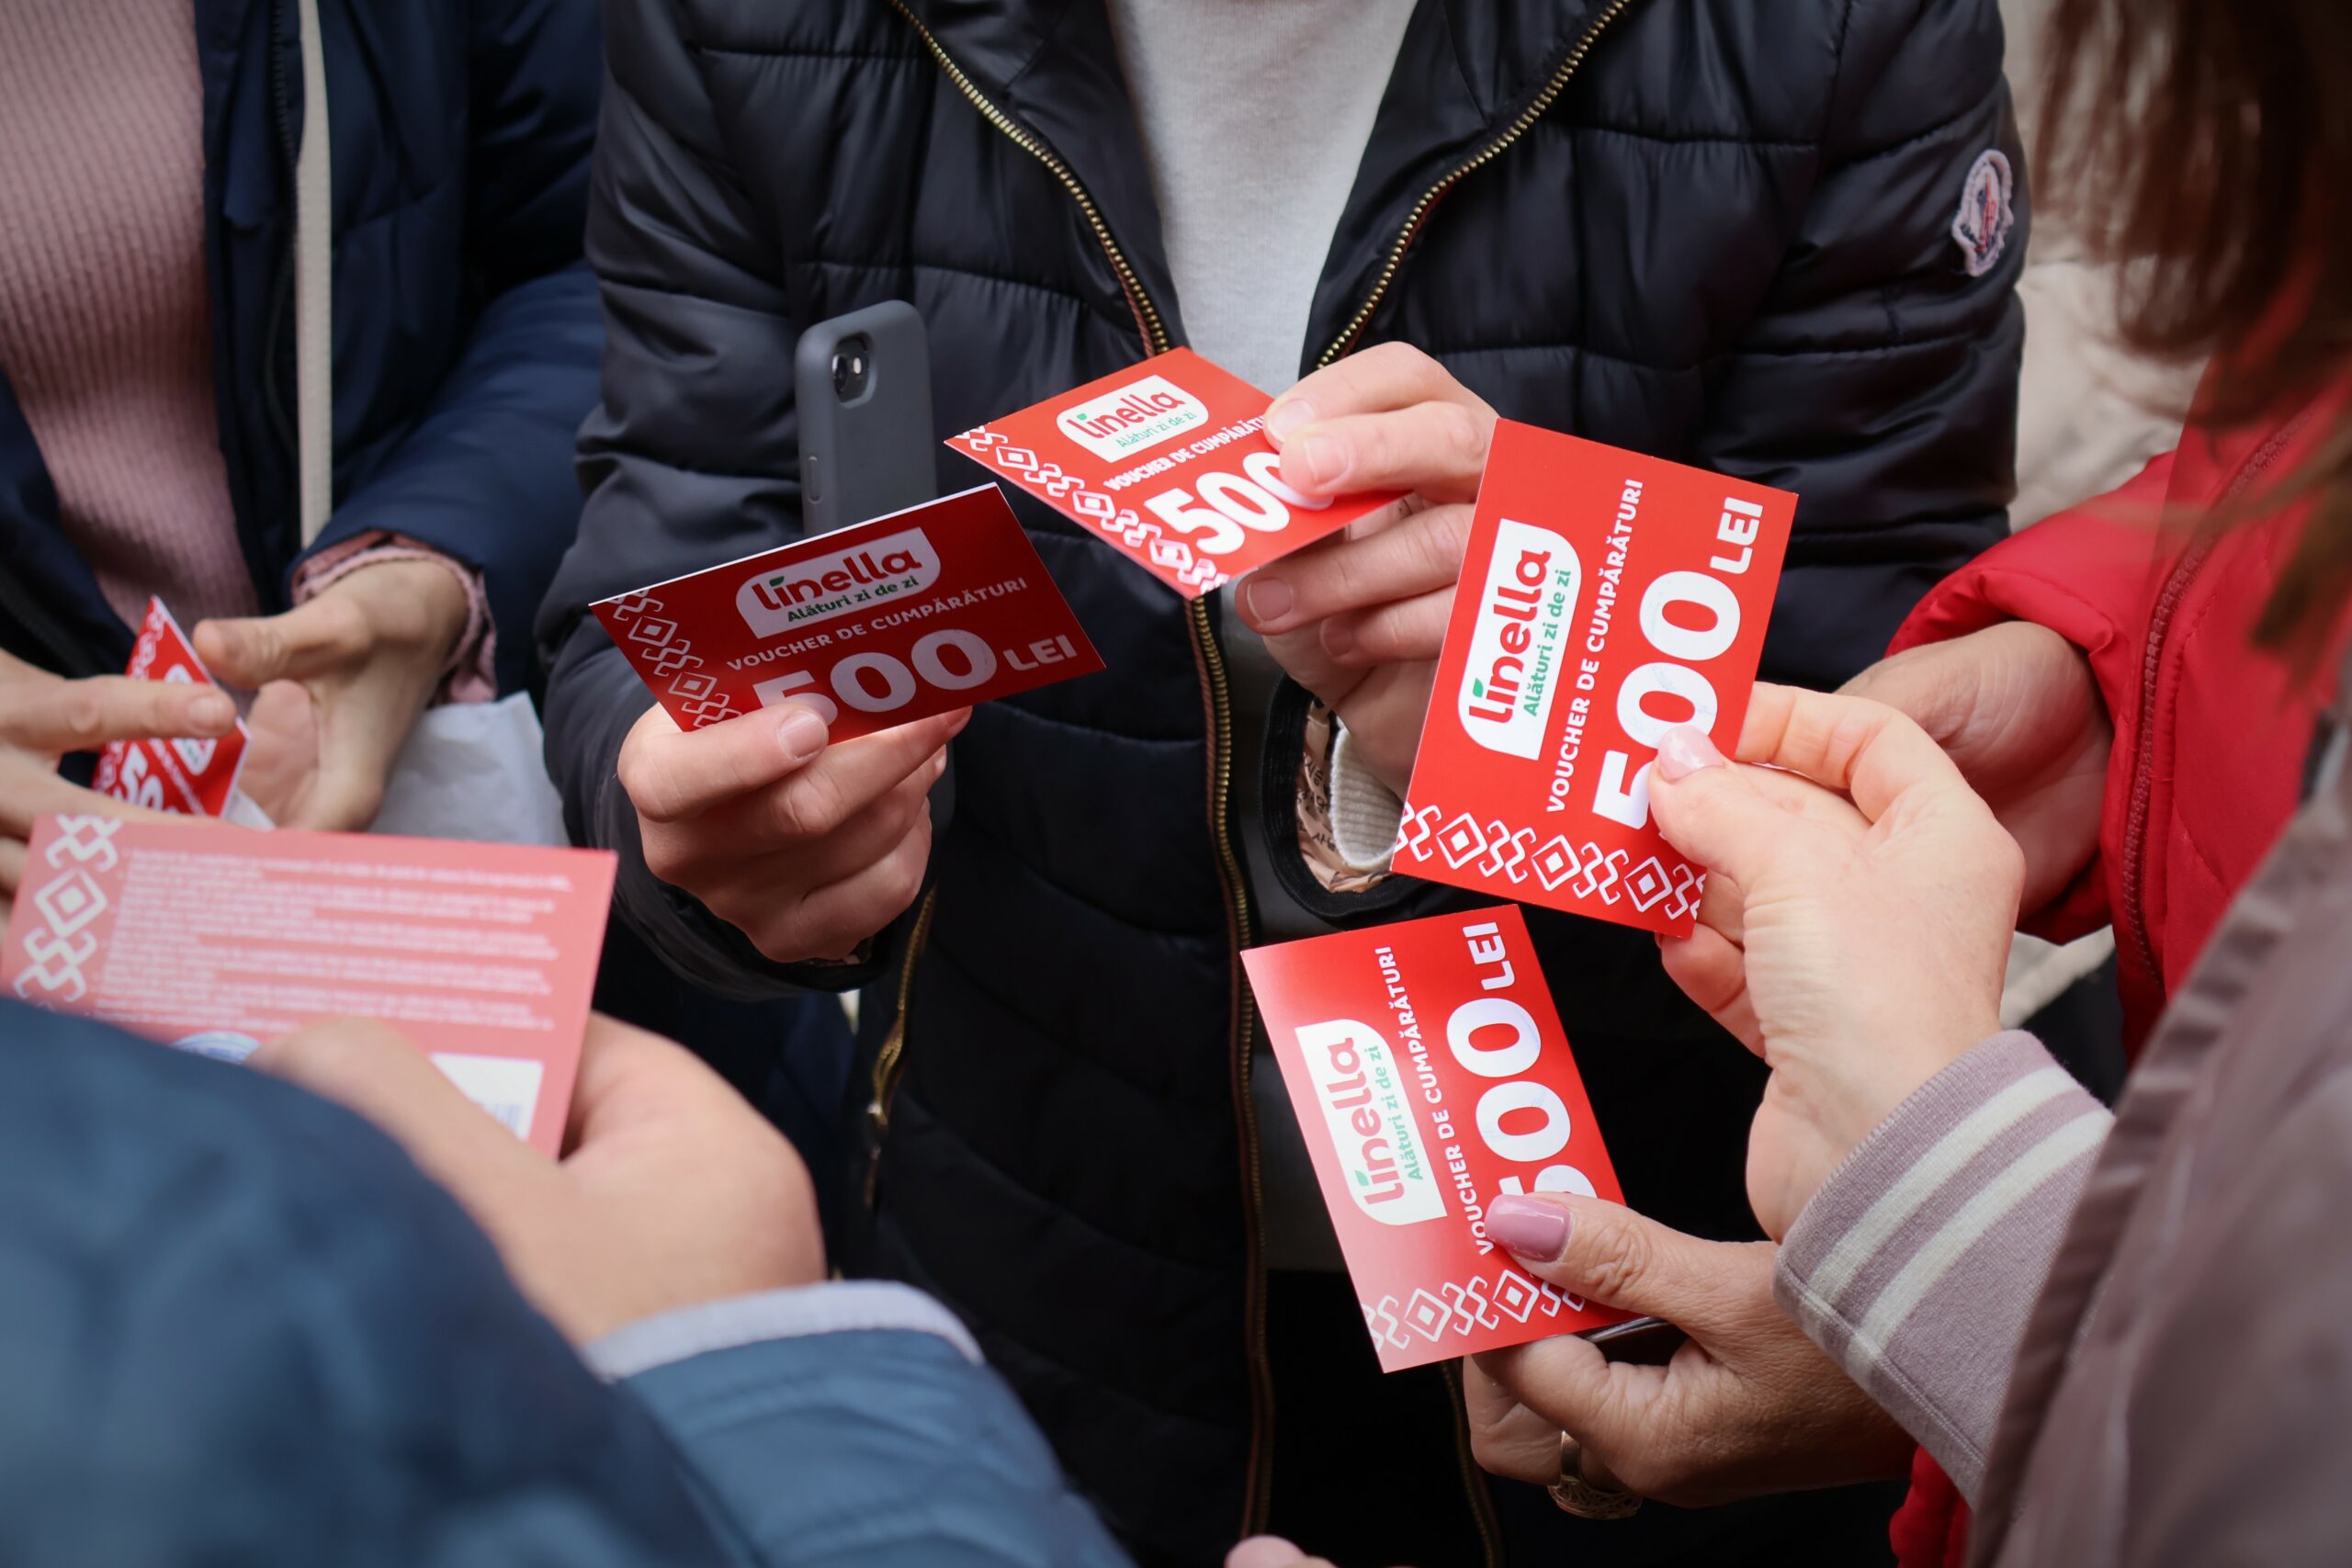 Female social workers hold red food vouchers for distribution to foster families in Moldova